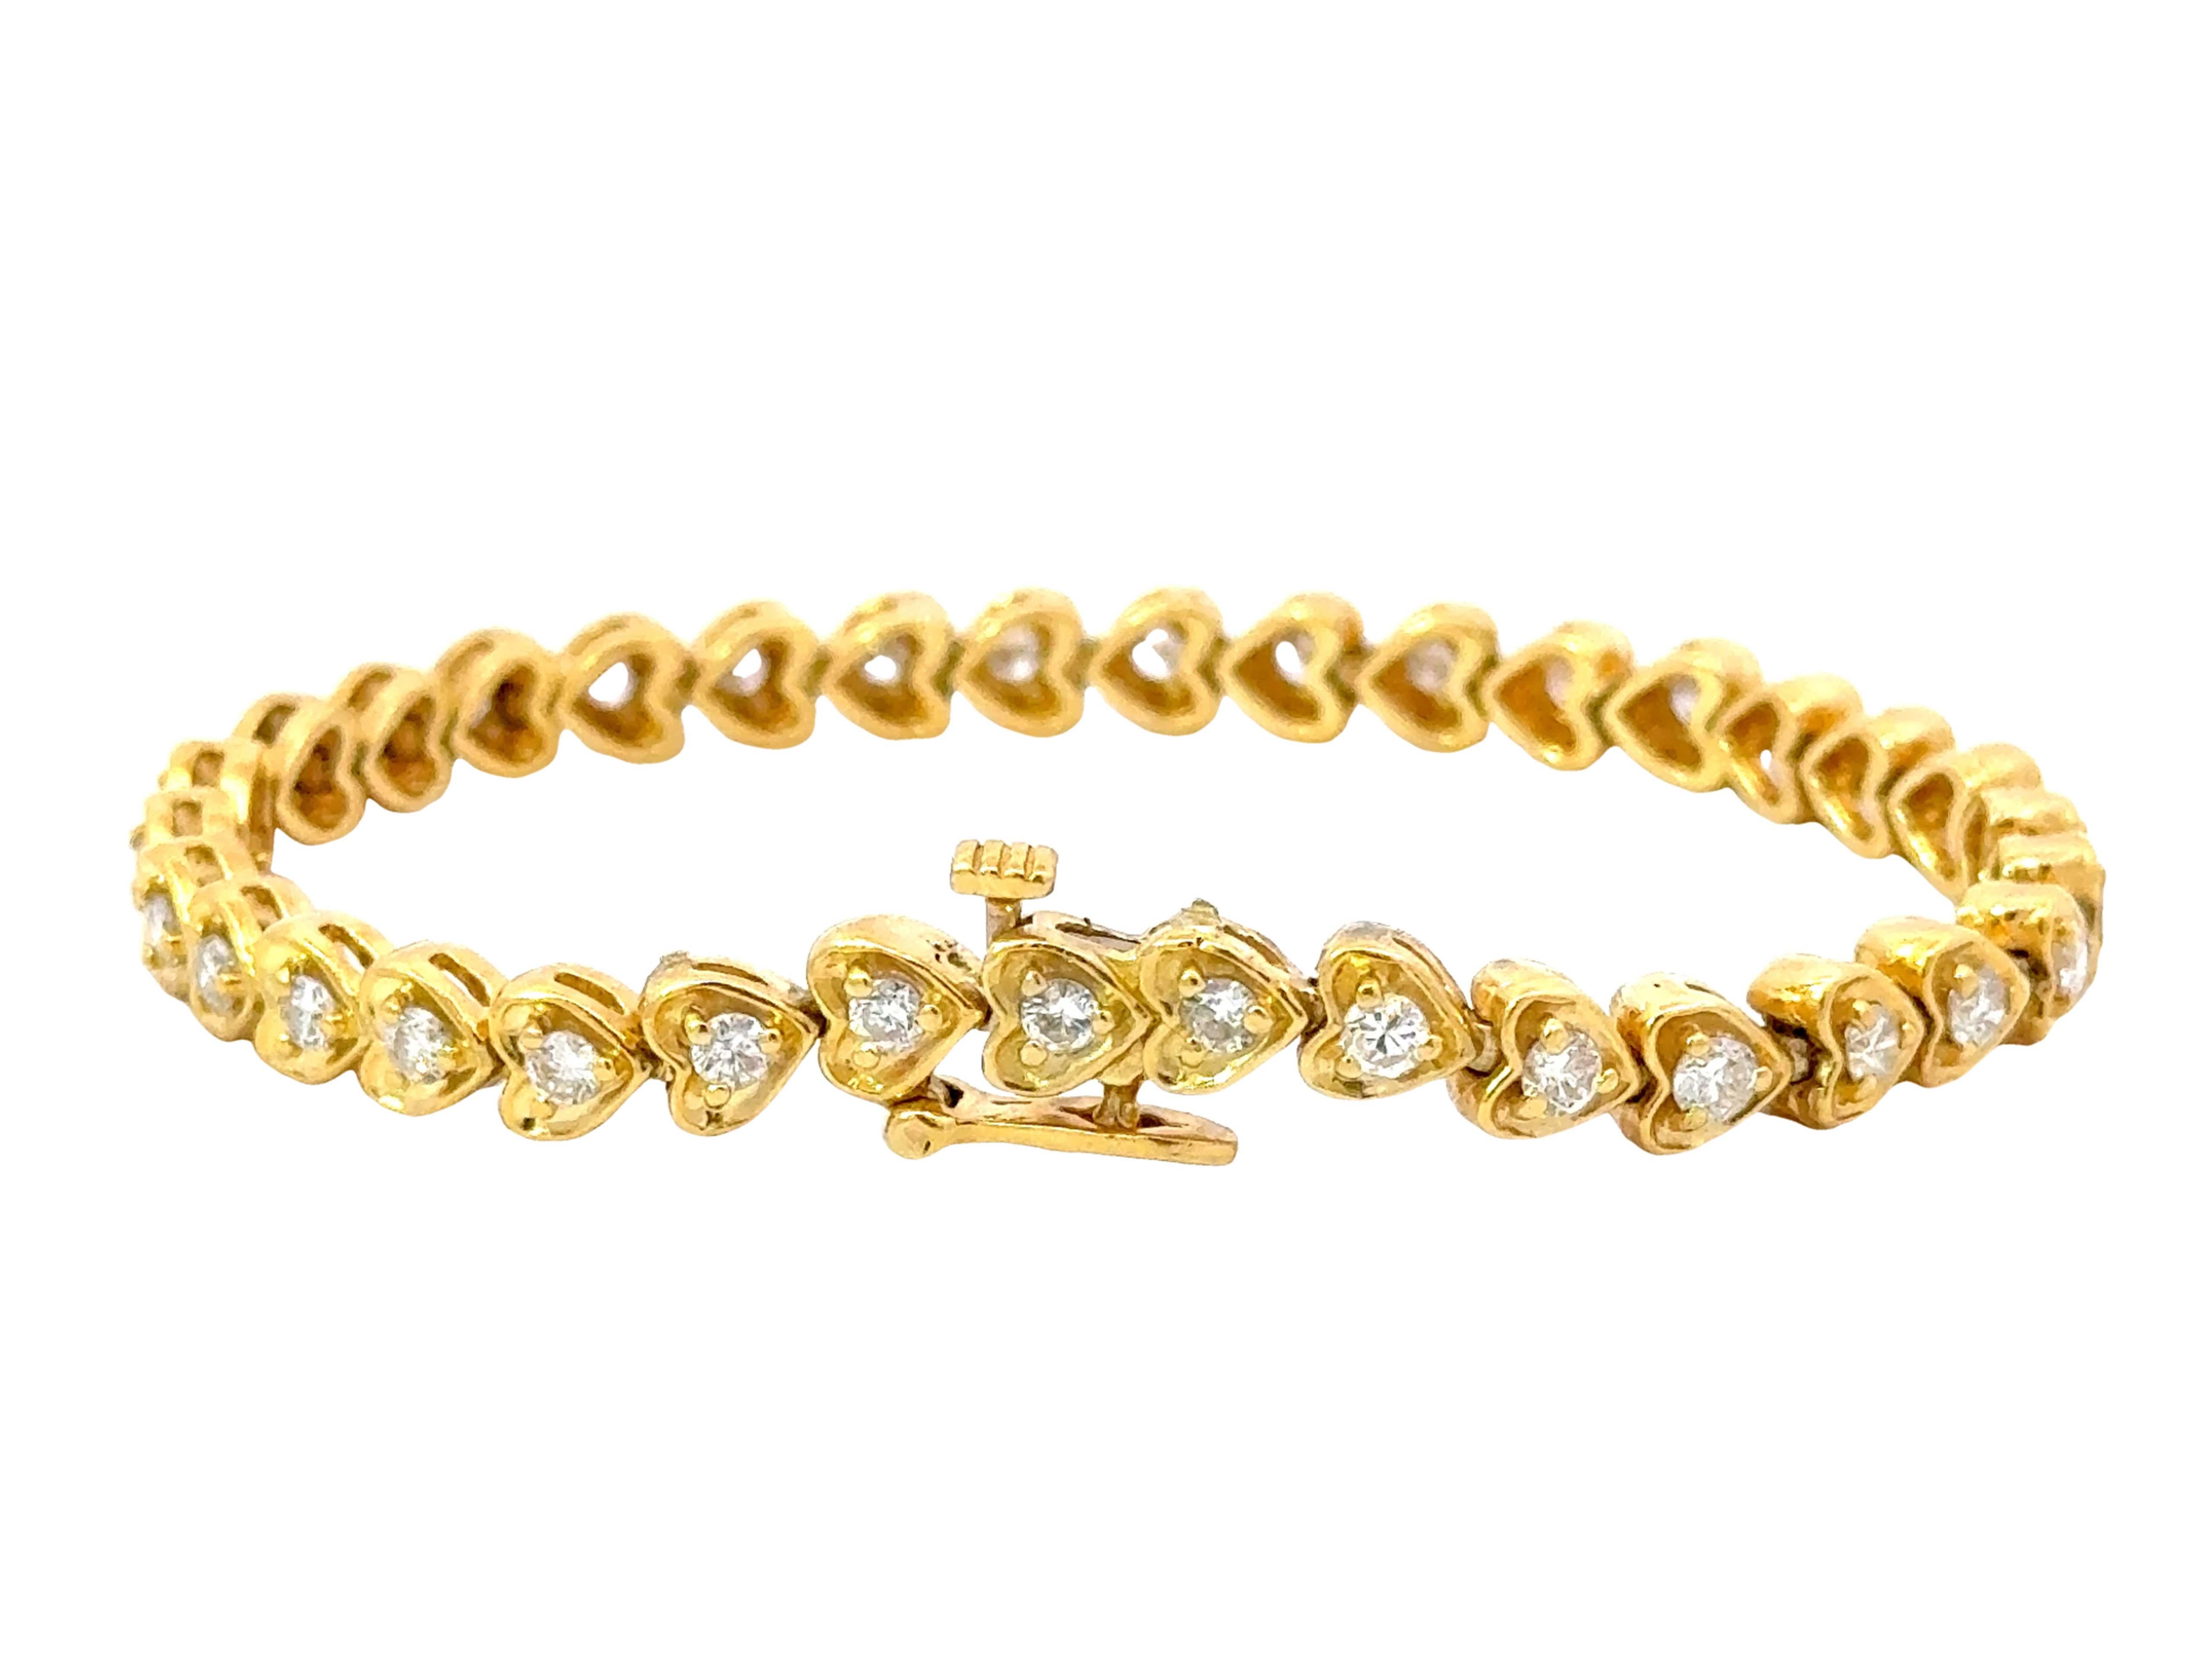 18k Yellow Gold Diamond Heart Tennis Bracelet In Excellent Condition For Sale In Honolulu, HI